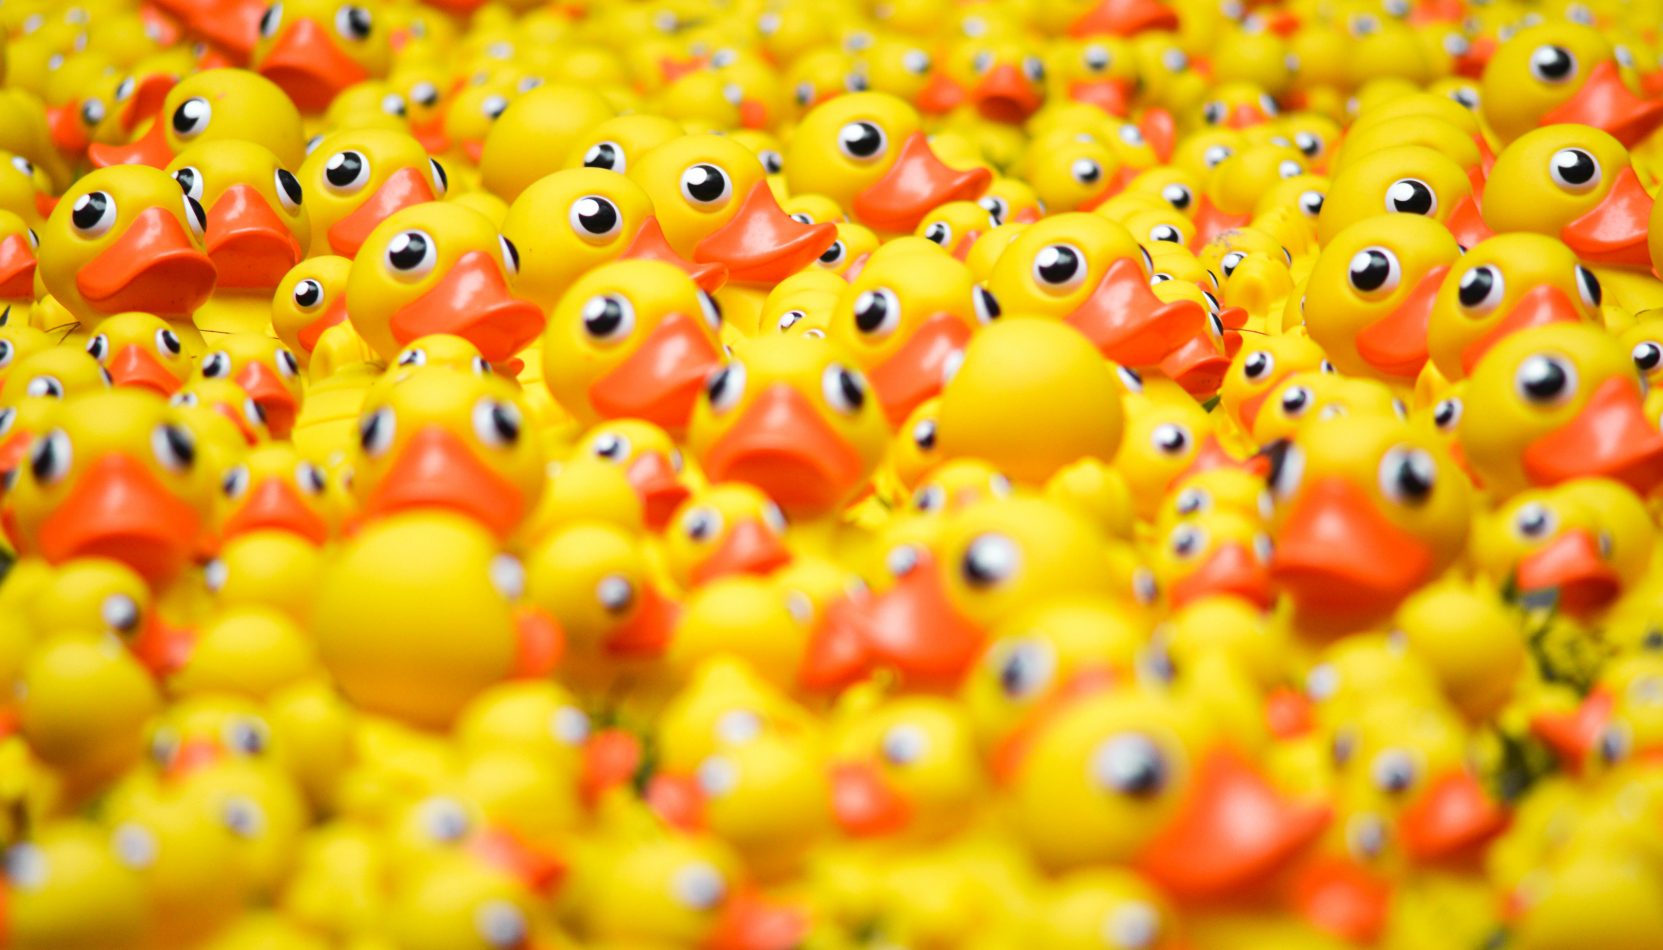 DUCK RACE, farnham, surrey, guide to, whats on, yes fan! whats on, family days out